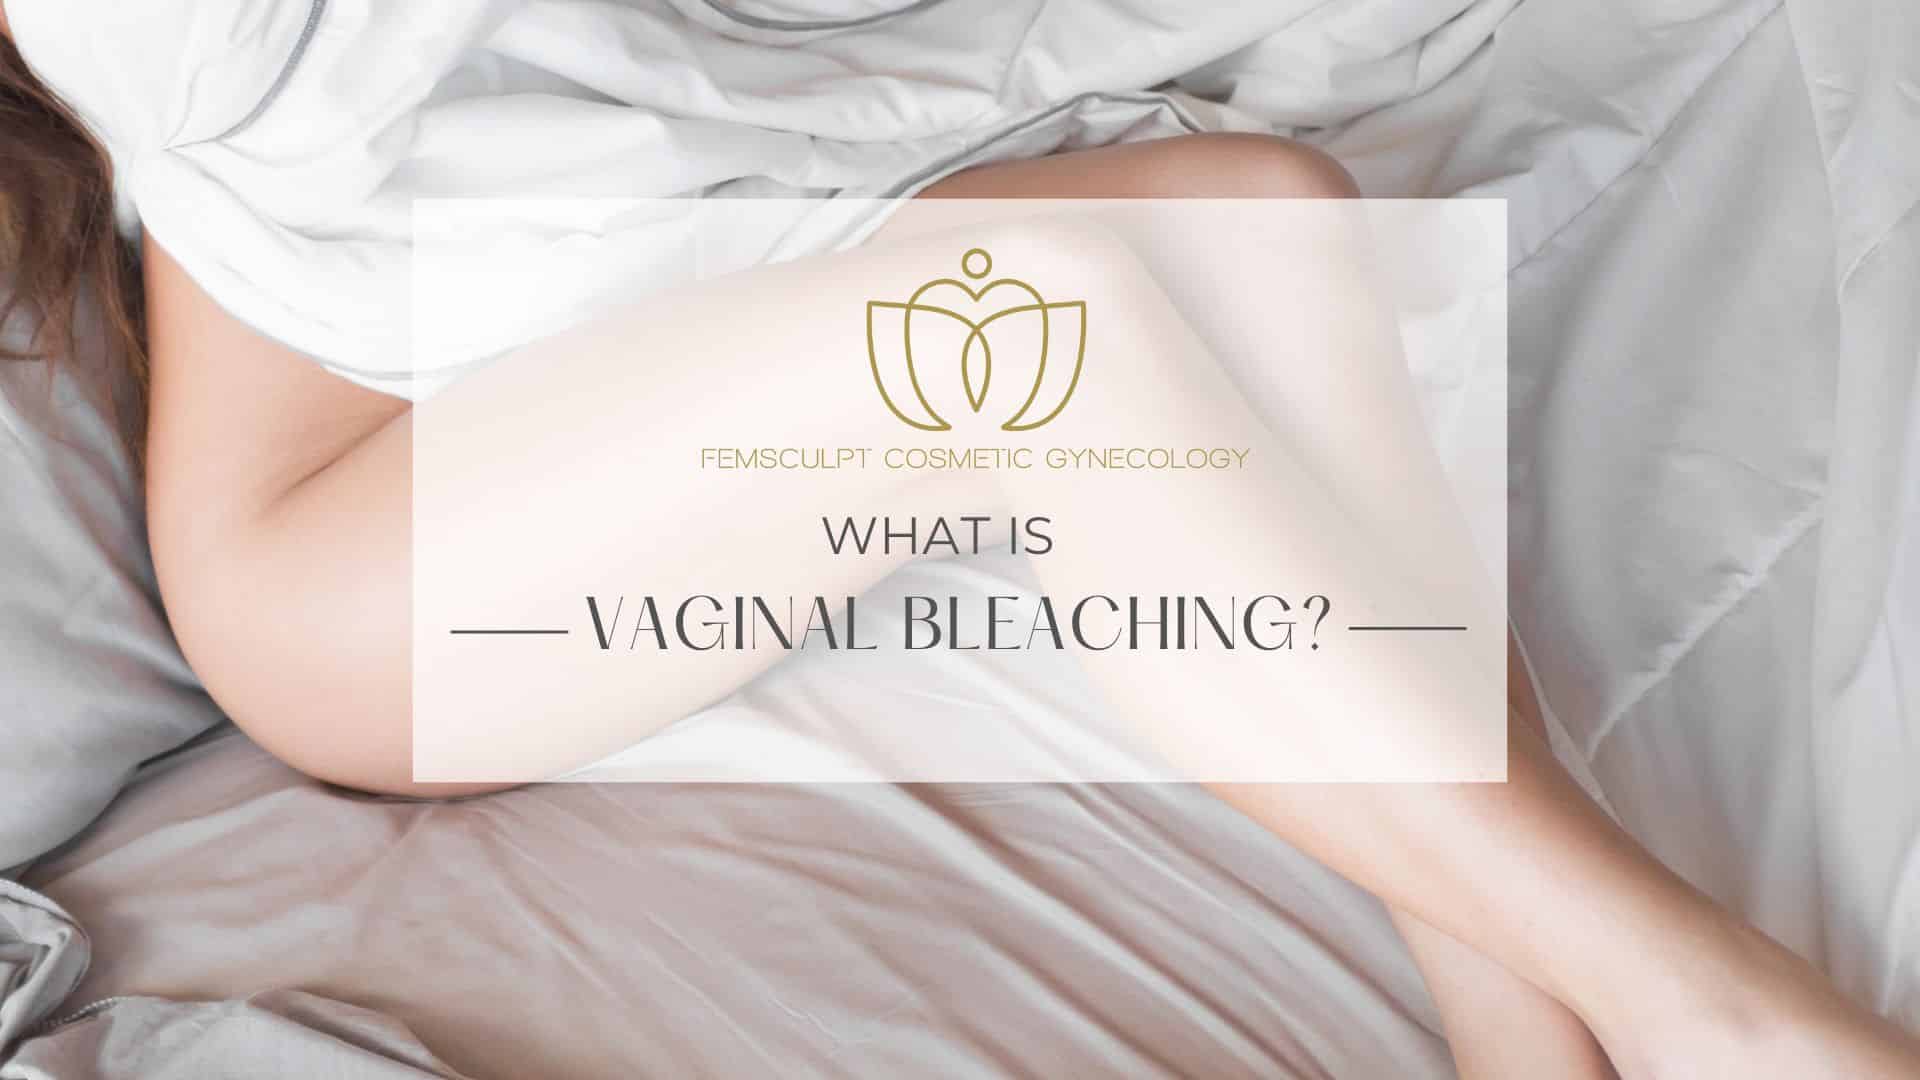 What is vaginal bleaching?